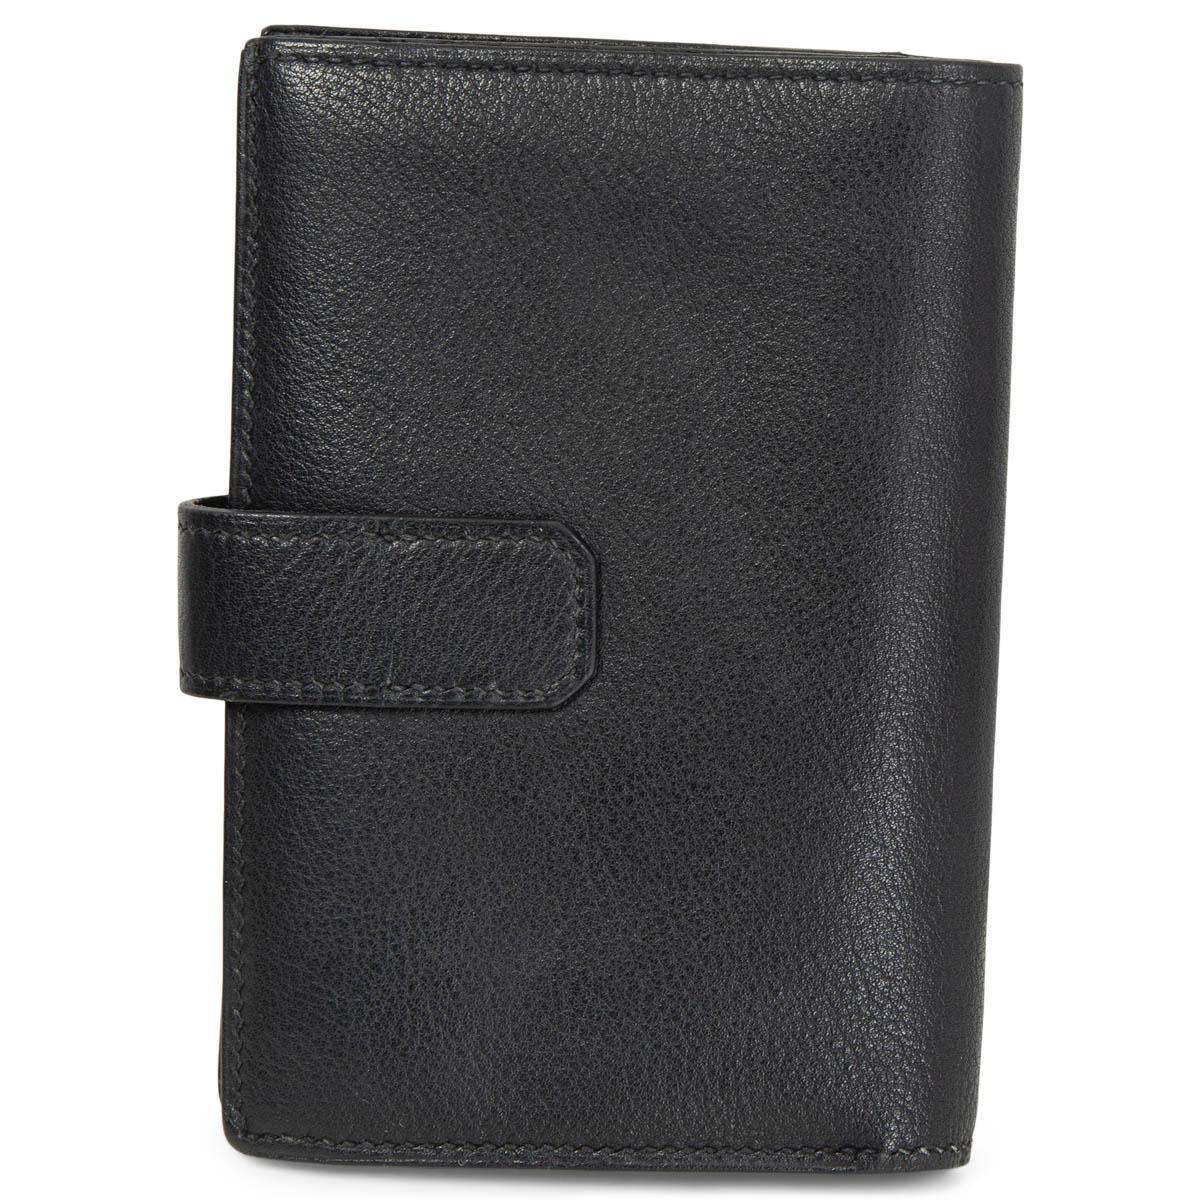 100% authentic Hermès Jura Bi-Fold Wallet in black Veau Togo leather (not 100% sure). Has been carried and shows some faint scratches on the leather and a small tear on the inside credit card pocket. Overall in good condition.